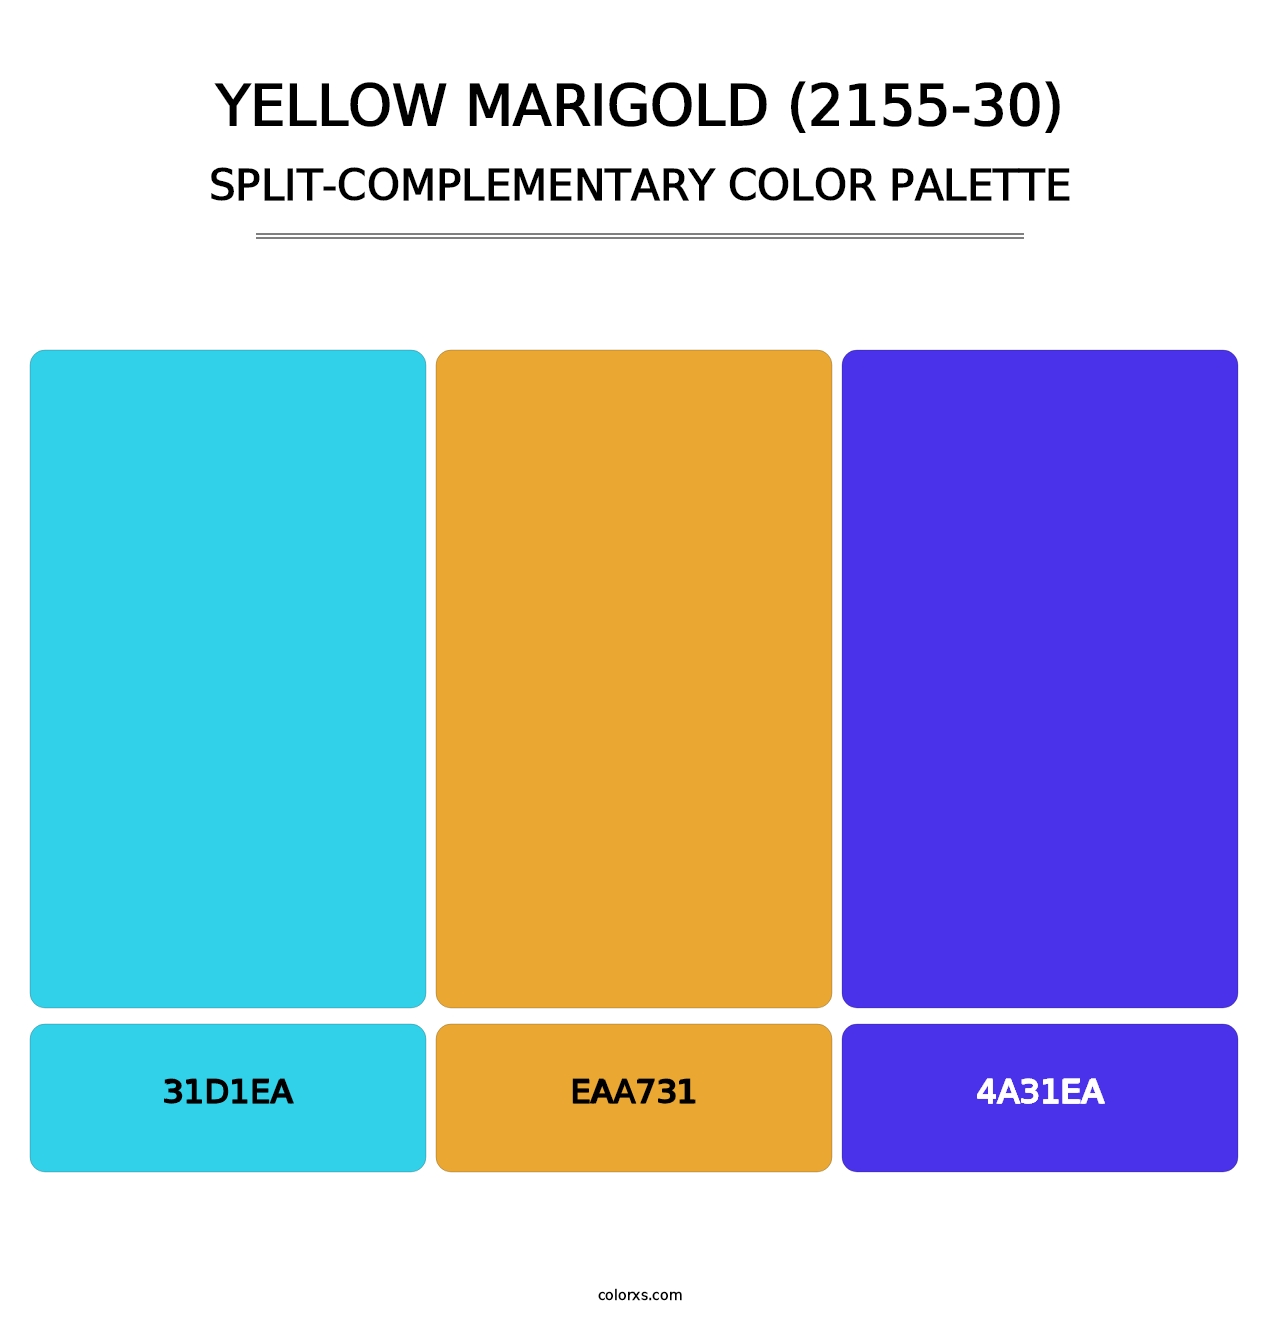 Yellow Marigold (2155-30) - Split-Complementary Color Palette